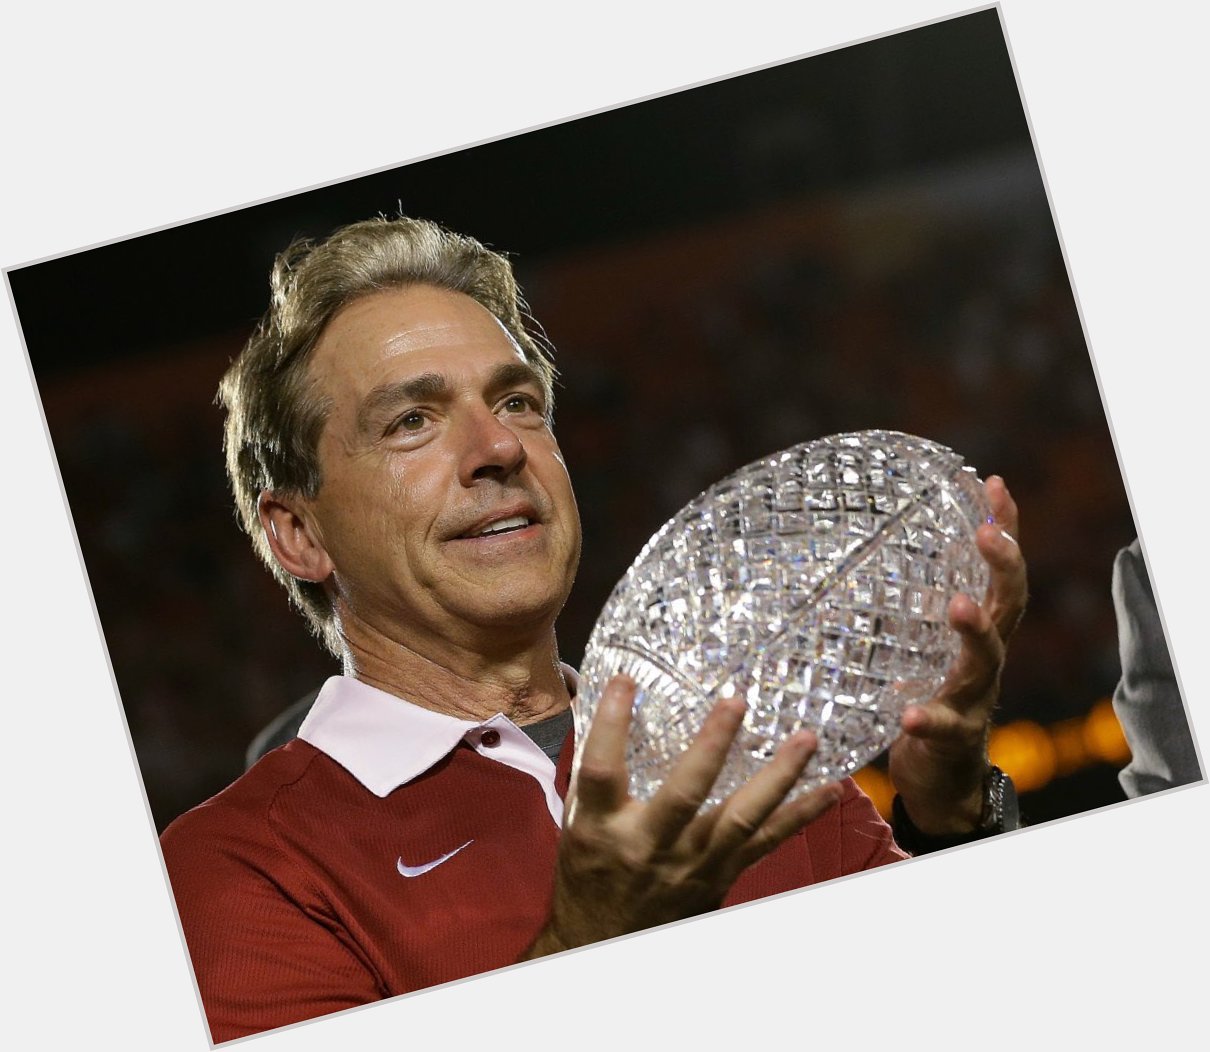 HAPPY 64th BIRTHDAY to my man (and one of the best football coaches ever) Nick Saban!!! 